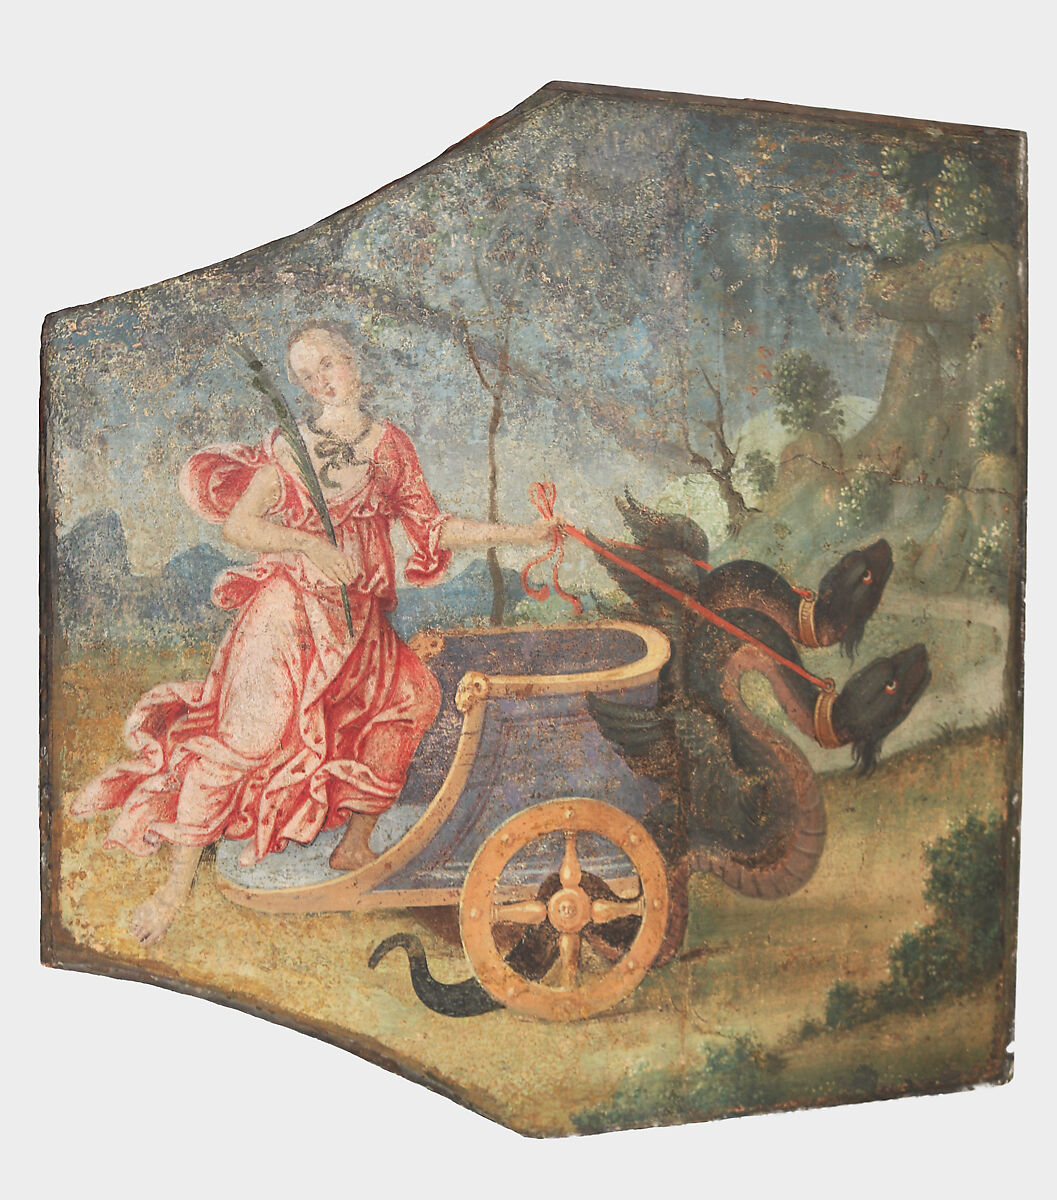 The Chariot of Ceres, Pinturicchio (Italian, Perugia 1454–1513 Siena), Fresco, transferred to canvas and attached to wood panels, Italian, Umbria 